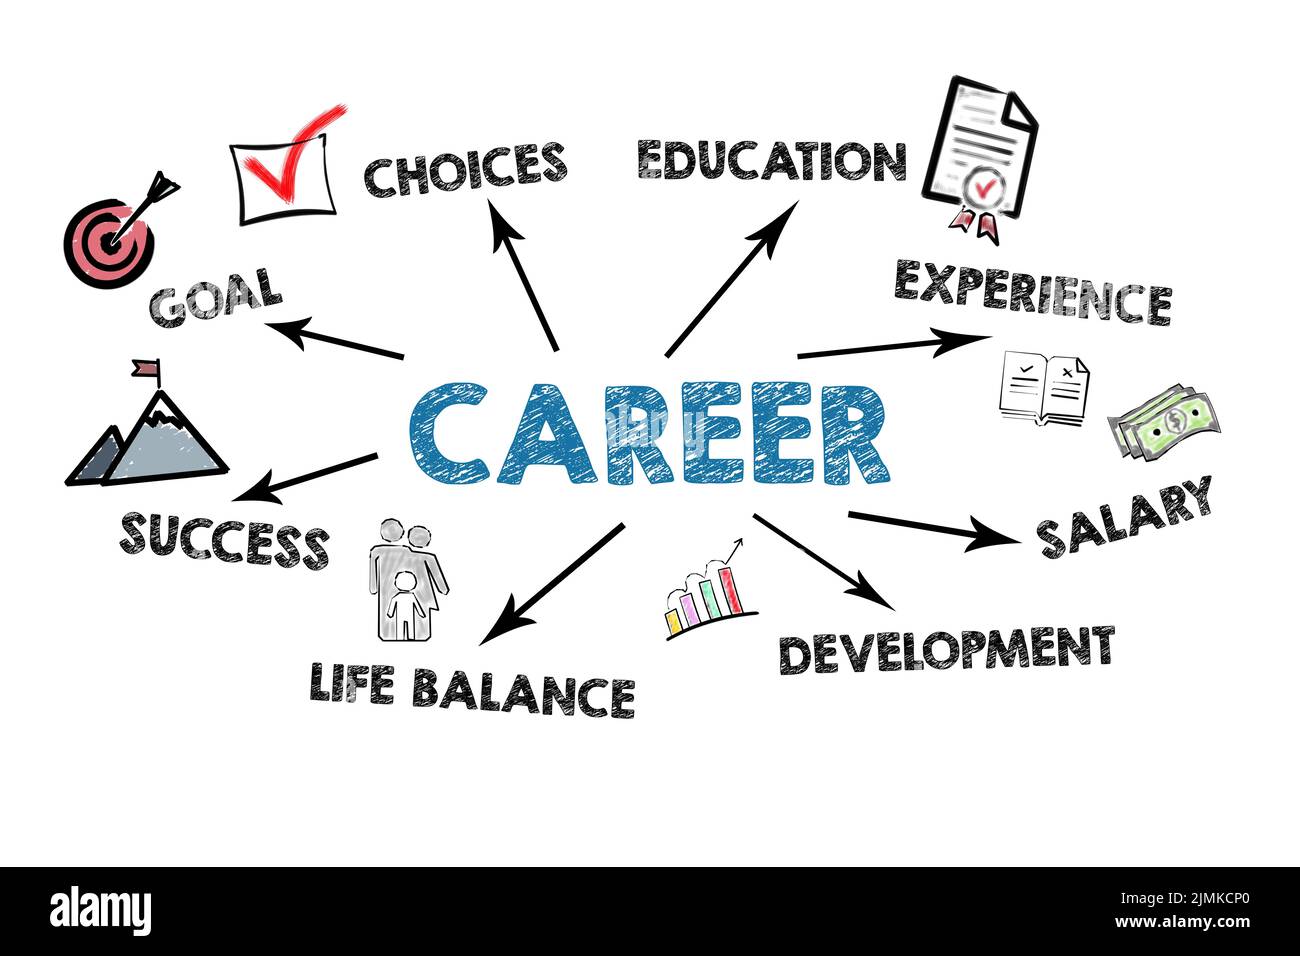 Career concept. Illustration with icons, keywords and direction arrows on a white background. Stock Photo